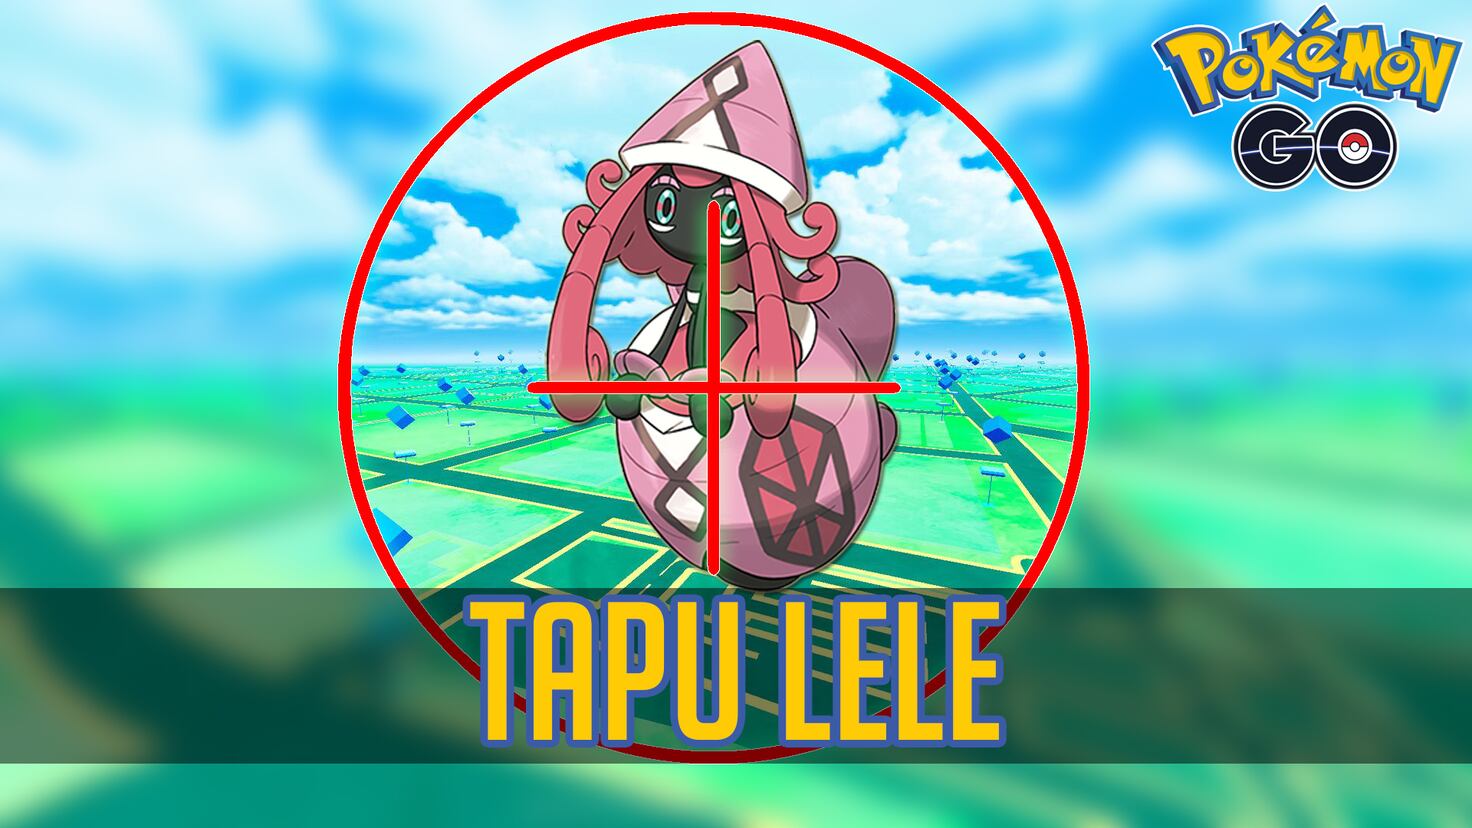 Tapu Lele Returns to Pokémon GO: Basic Guide with Counters, Rewards, and Everything You Need to Know